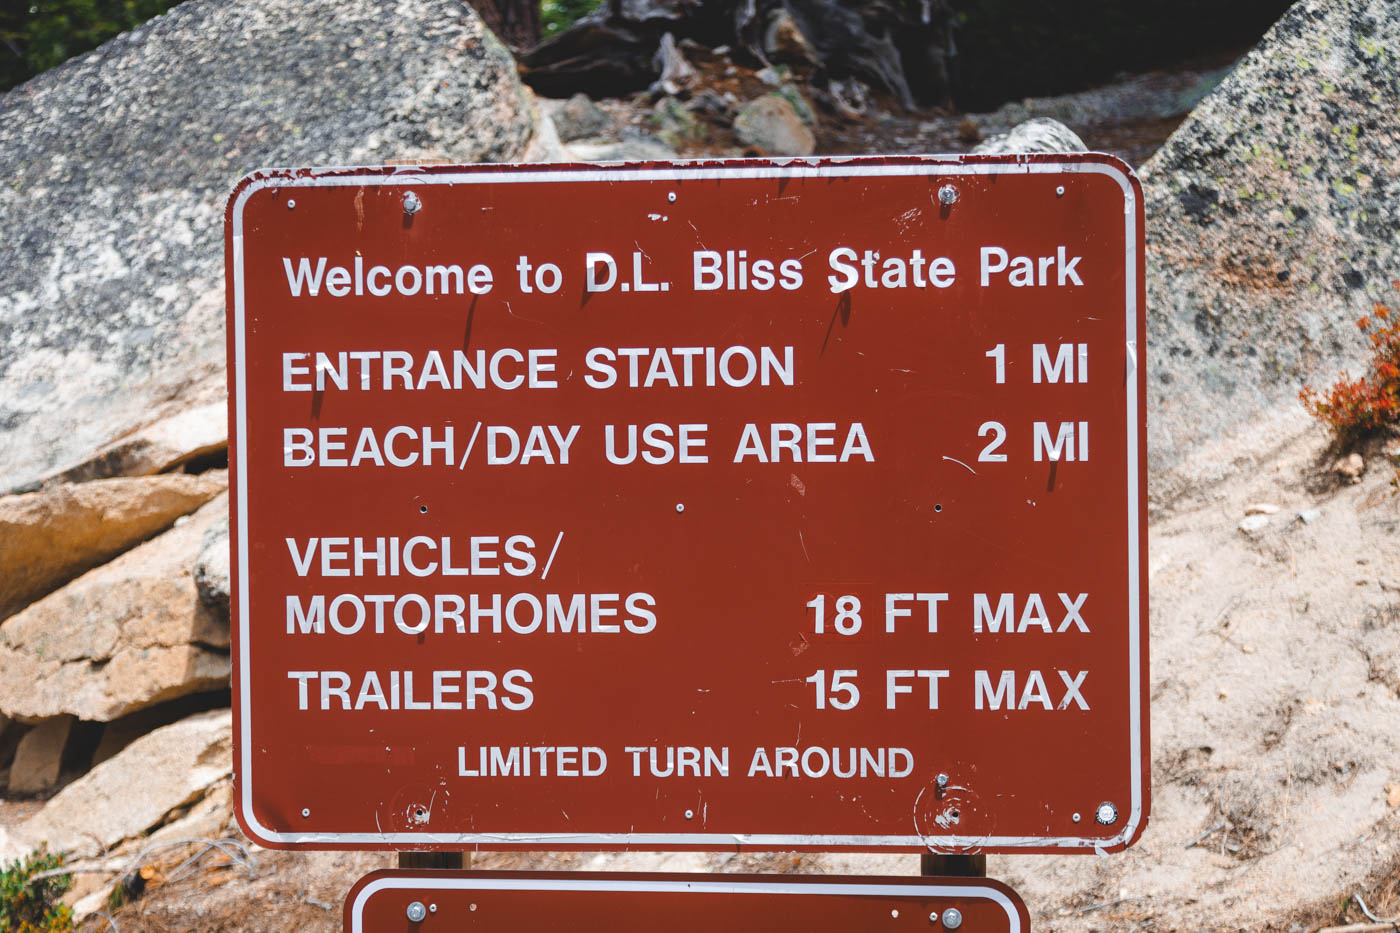 The welcome information sign into D.L. Bliss State Park.